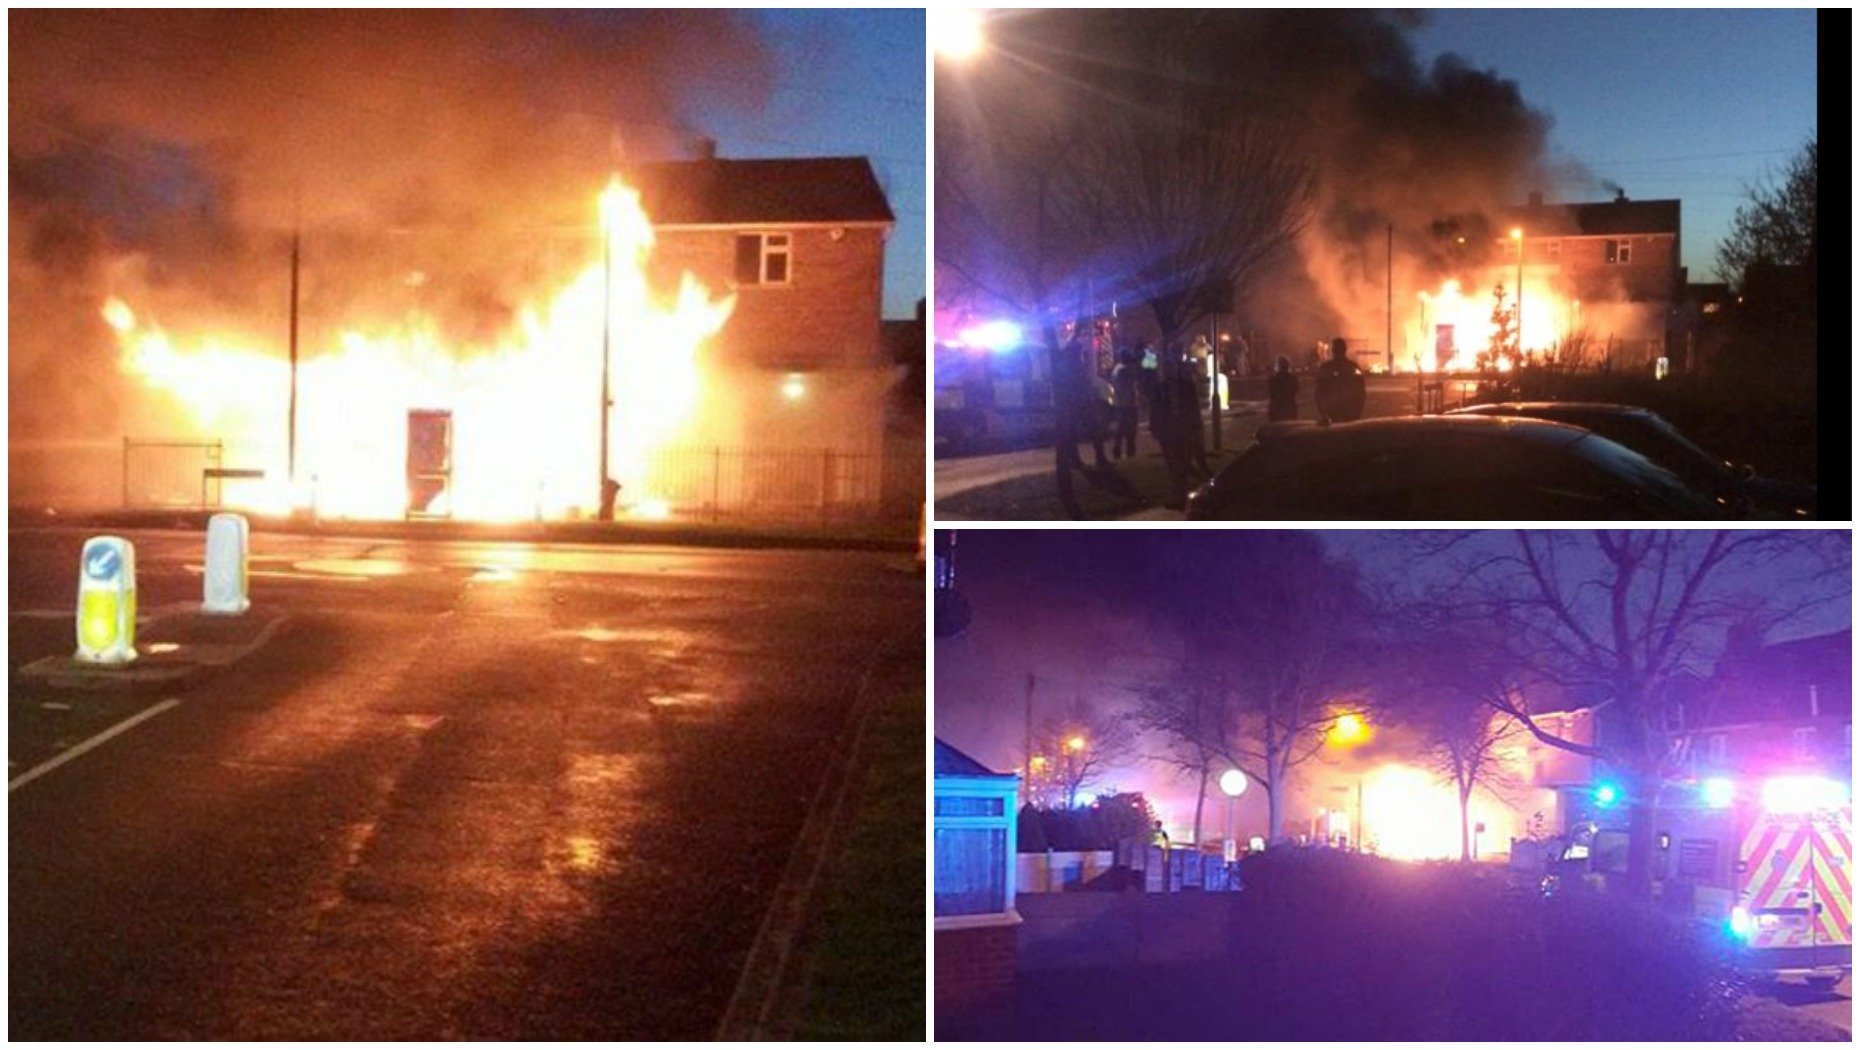 The scene of the fire on De Wint Avenue in Lincoln. Photos: Eyewitnesses Jordan Challis, Sam Seaman and Jacob Robson for The Lincolnite